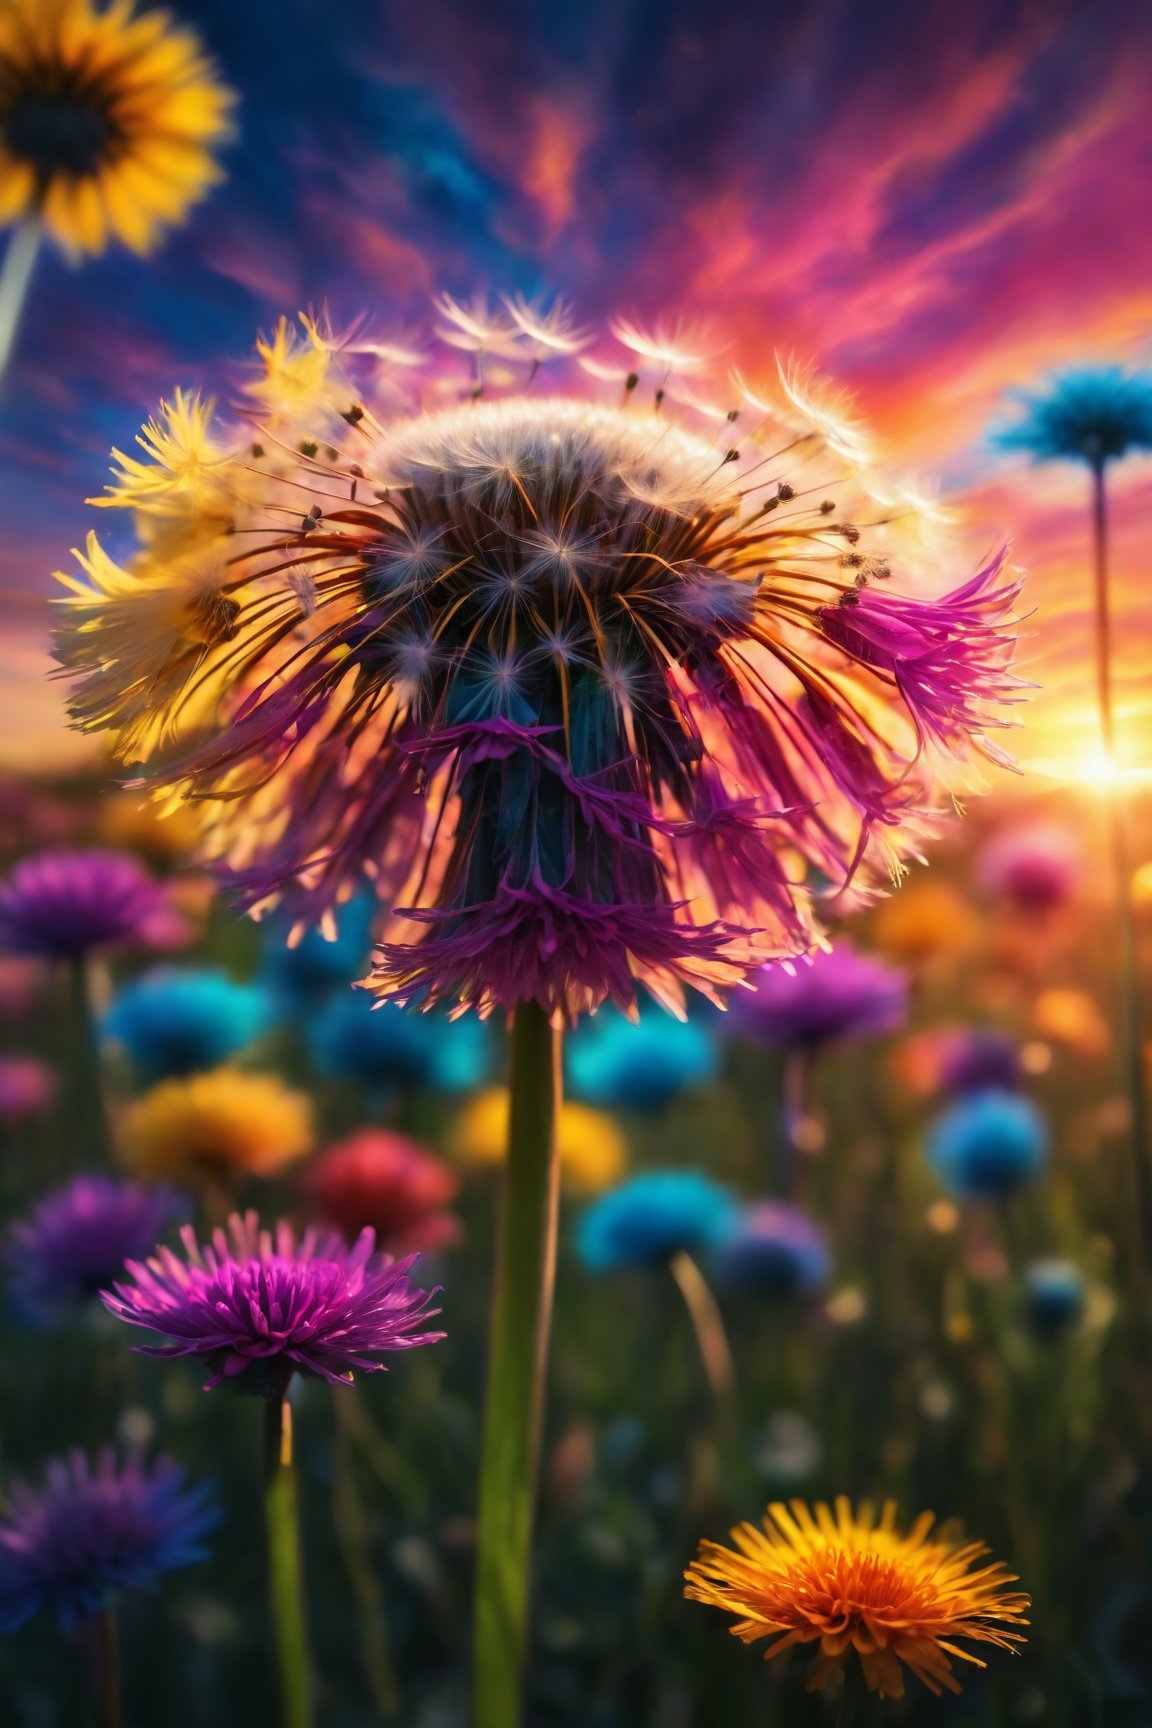 (best quality,8K,highres,masterpiece), ultra-detailed, (hyper-colorful, vivid), photograph capturing dandelions against a glorious and super colorful sunset. Shot by the renowned photographer Lee Jeffries using a Nikon D850, the film stock used is Kodak Portra 400, resulting in rich and vibrant colors. The f1.6 lens adds a lifelike texture to the scene, while dramatic lighting enhances the overall effect, creating a hyper-realistic portrayal. Trending on ArtStation and utilizing Unreal Engine, this Cinestill 800 masterpiece is a burst of super colorful beauty